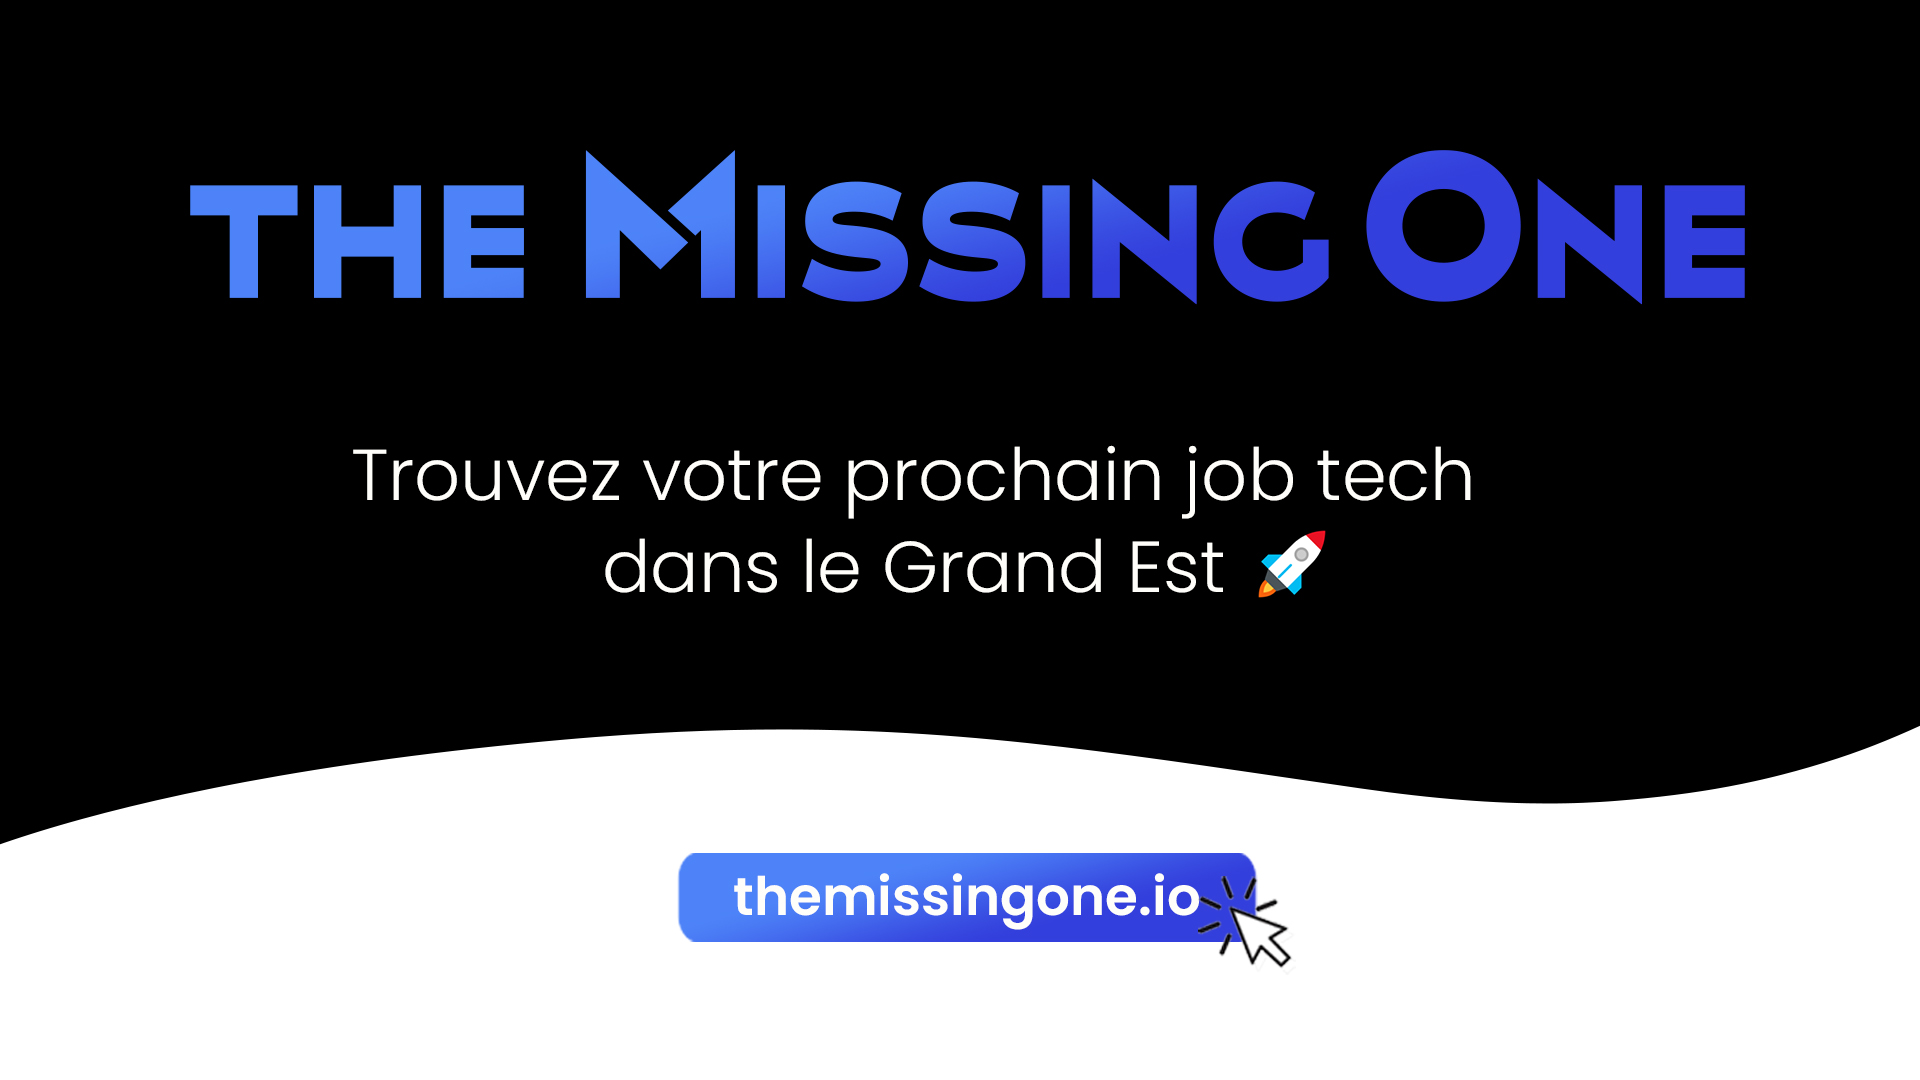 « The Missing One » pour la relation recruteurs-candidats